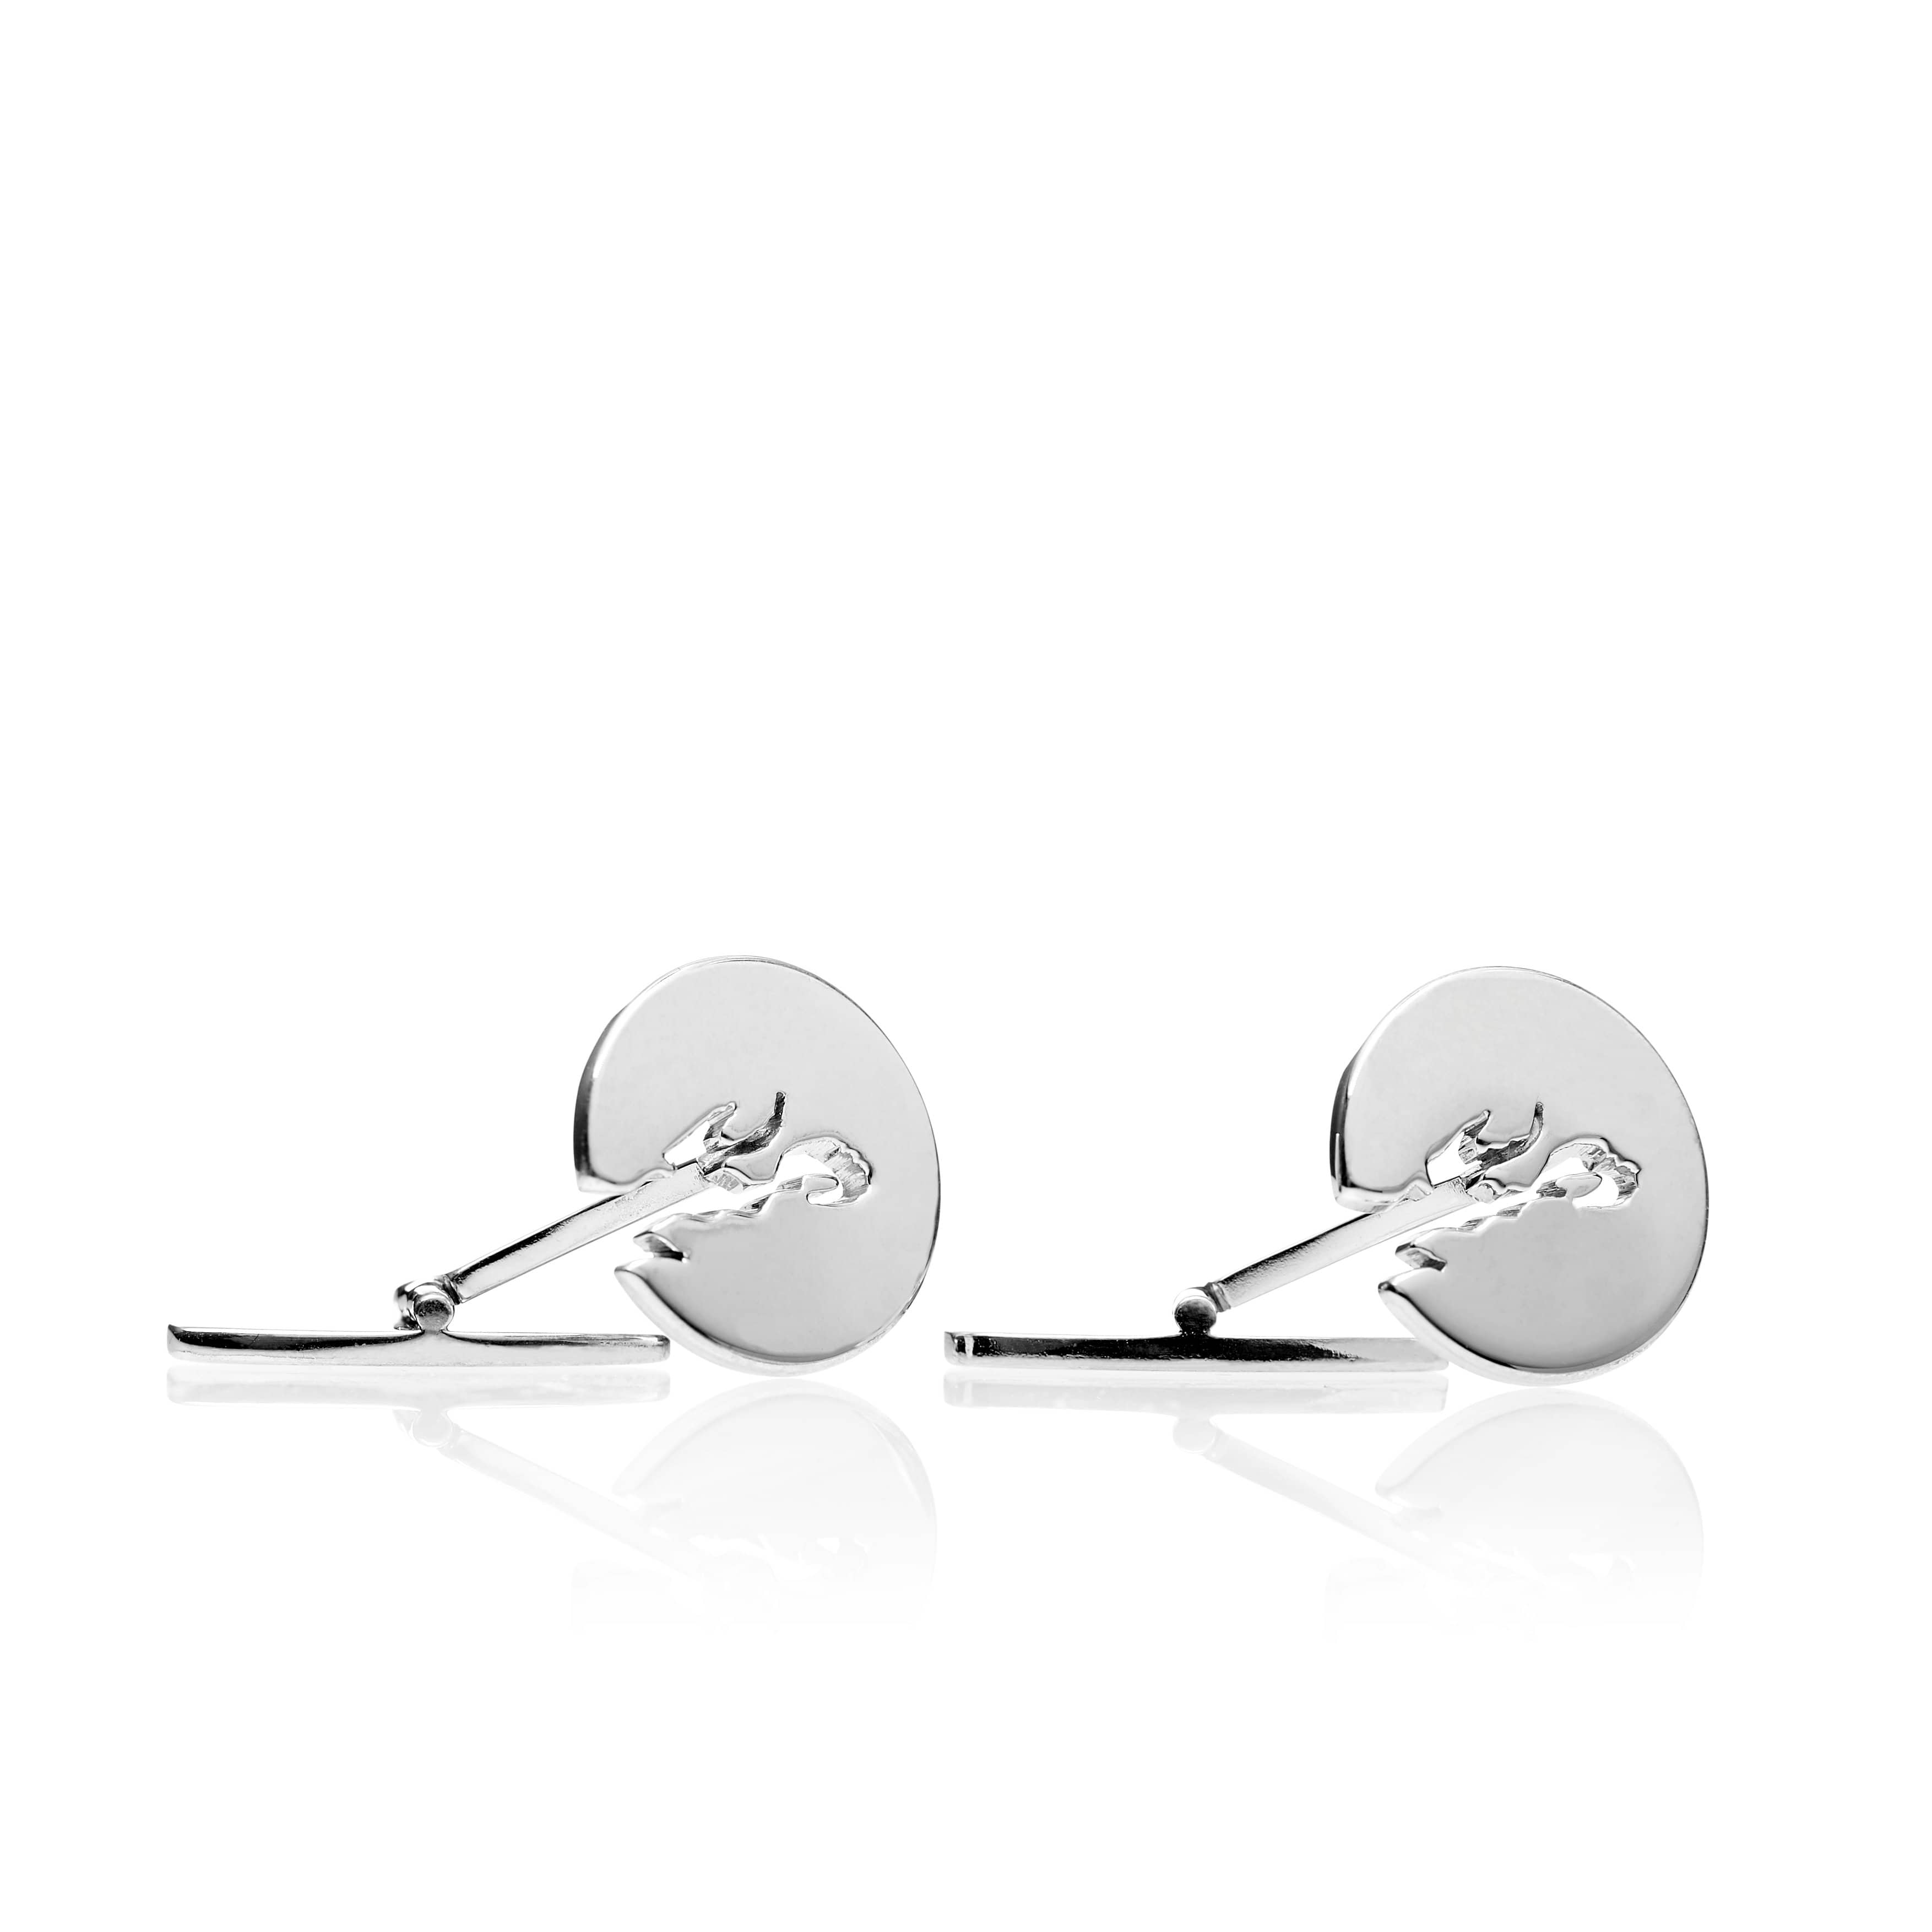 Popular fjord cufflinks with the Oslo fjord design